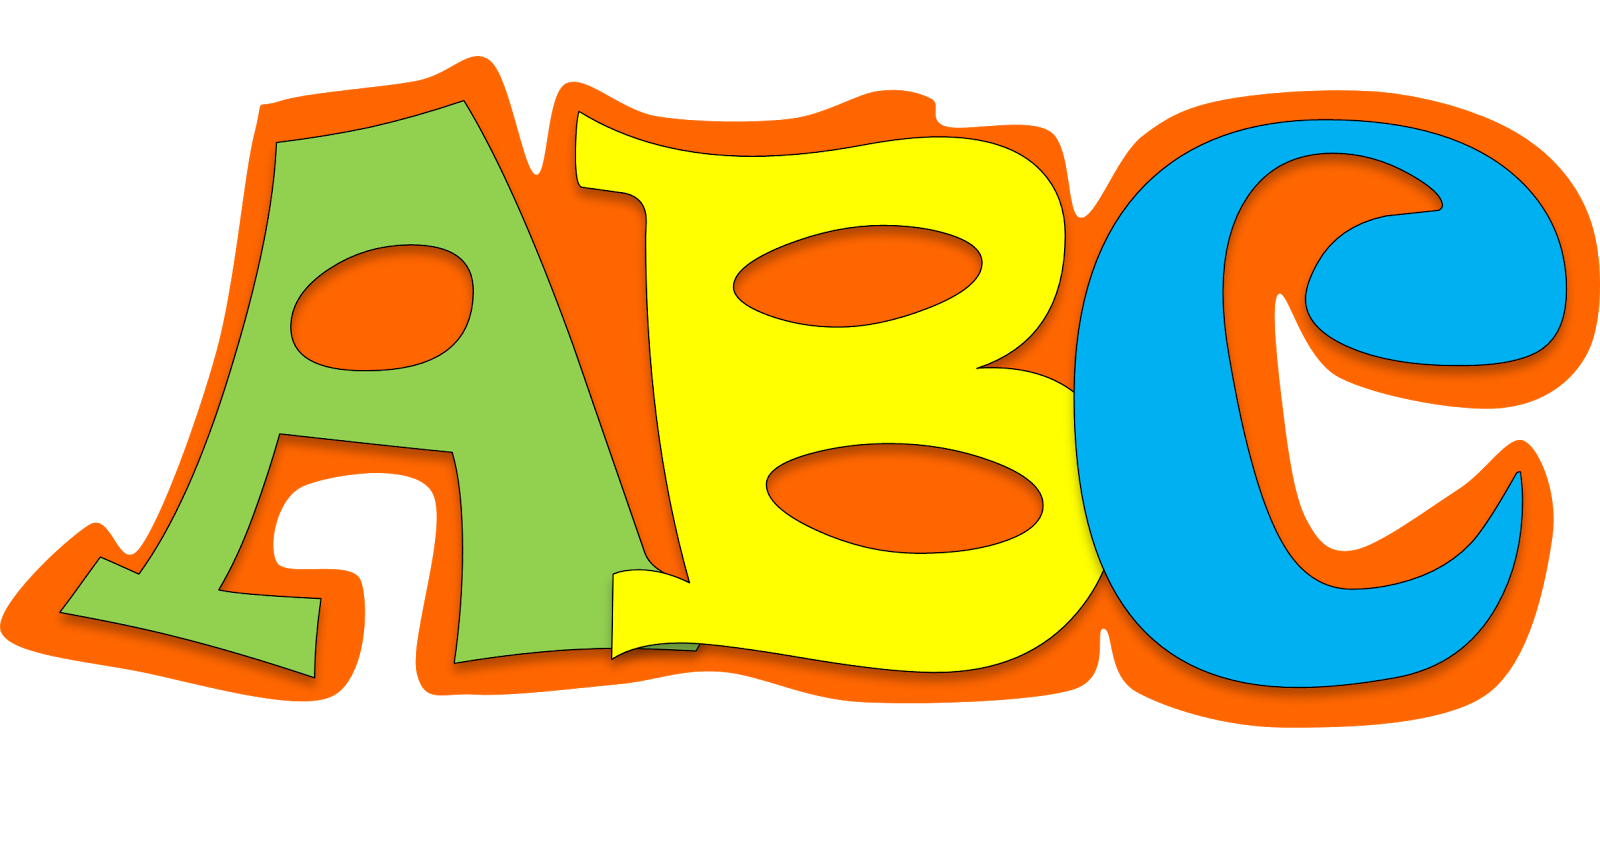 Free ABC Cliparts, Download Free Clip Art, Free Clip Art on